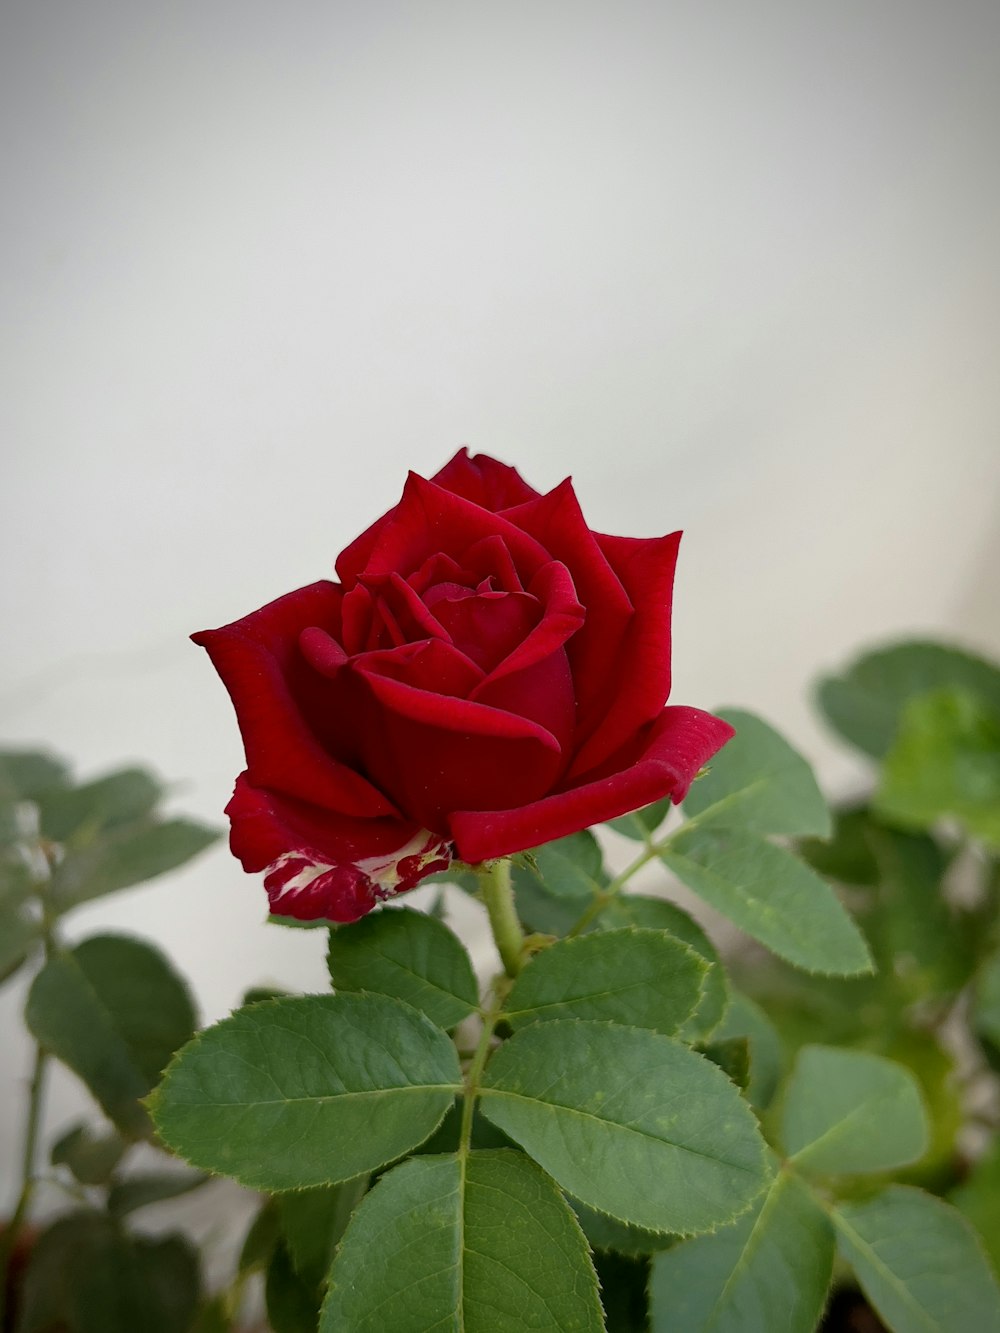 a single red rose with green leaves